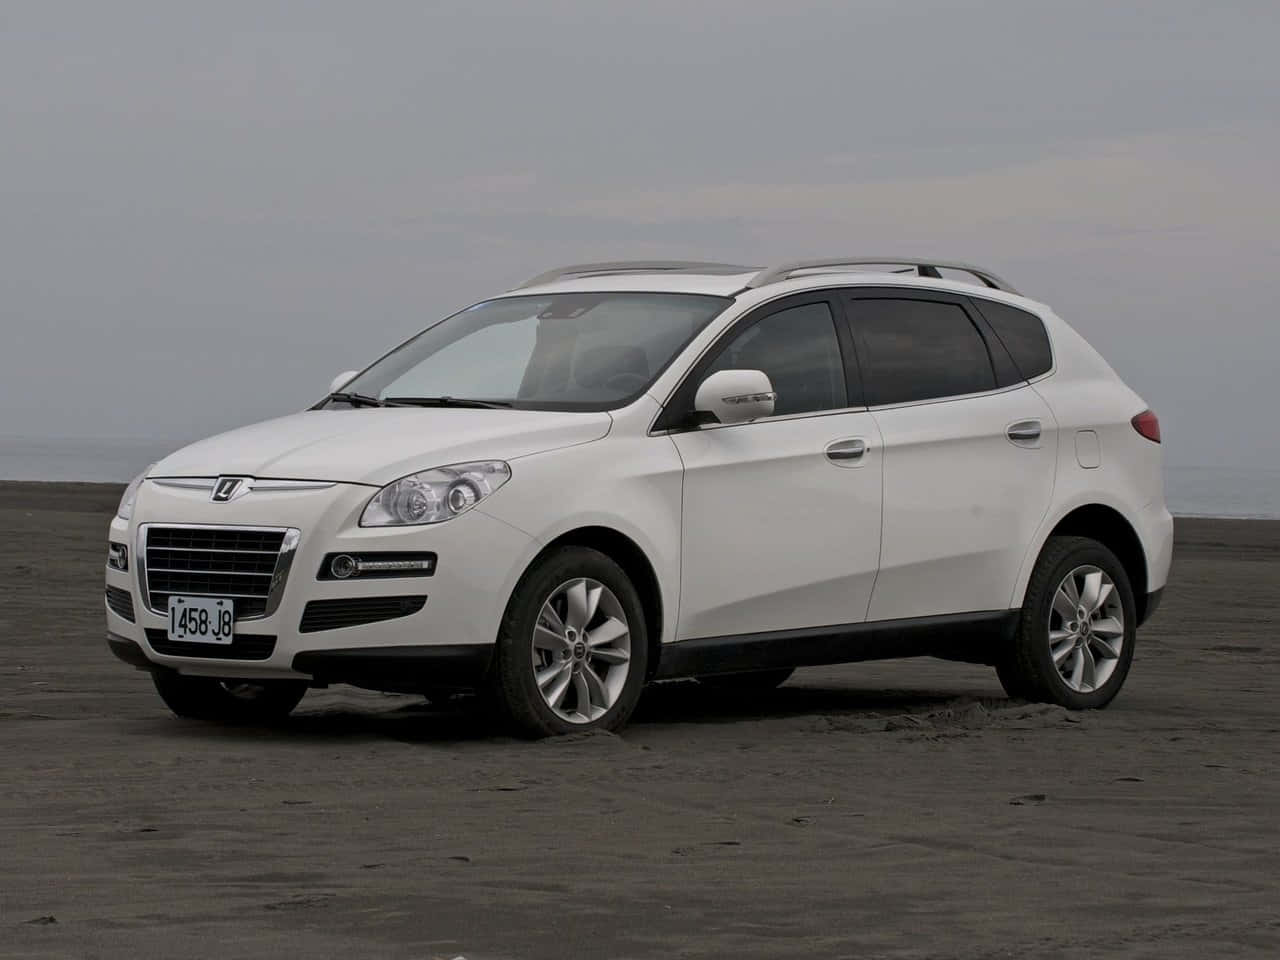 Caption: Luxgen MPV – A fusion of elegance and power Wallpaper